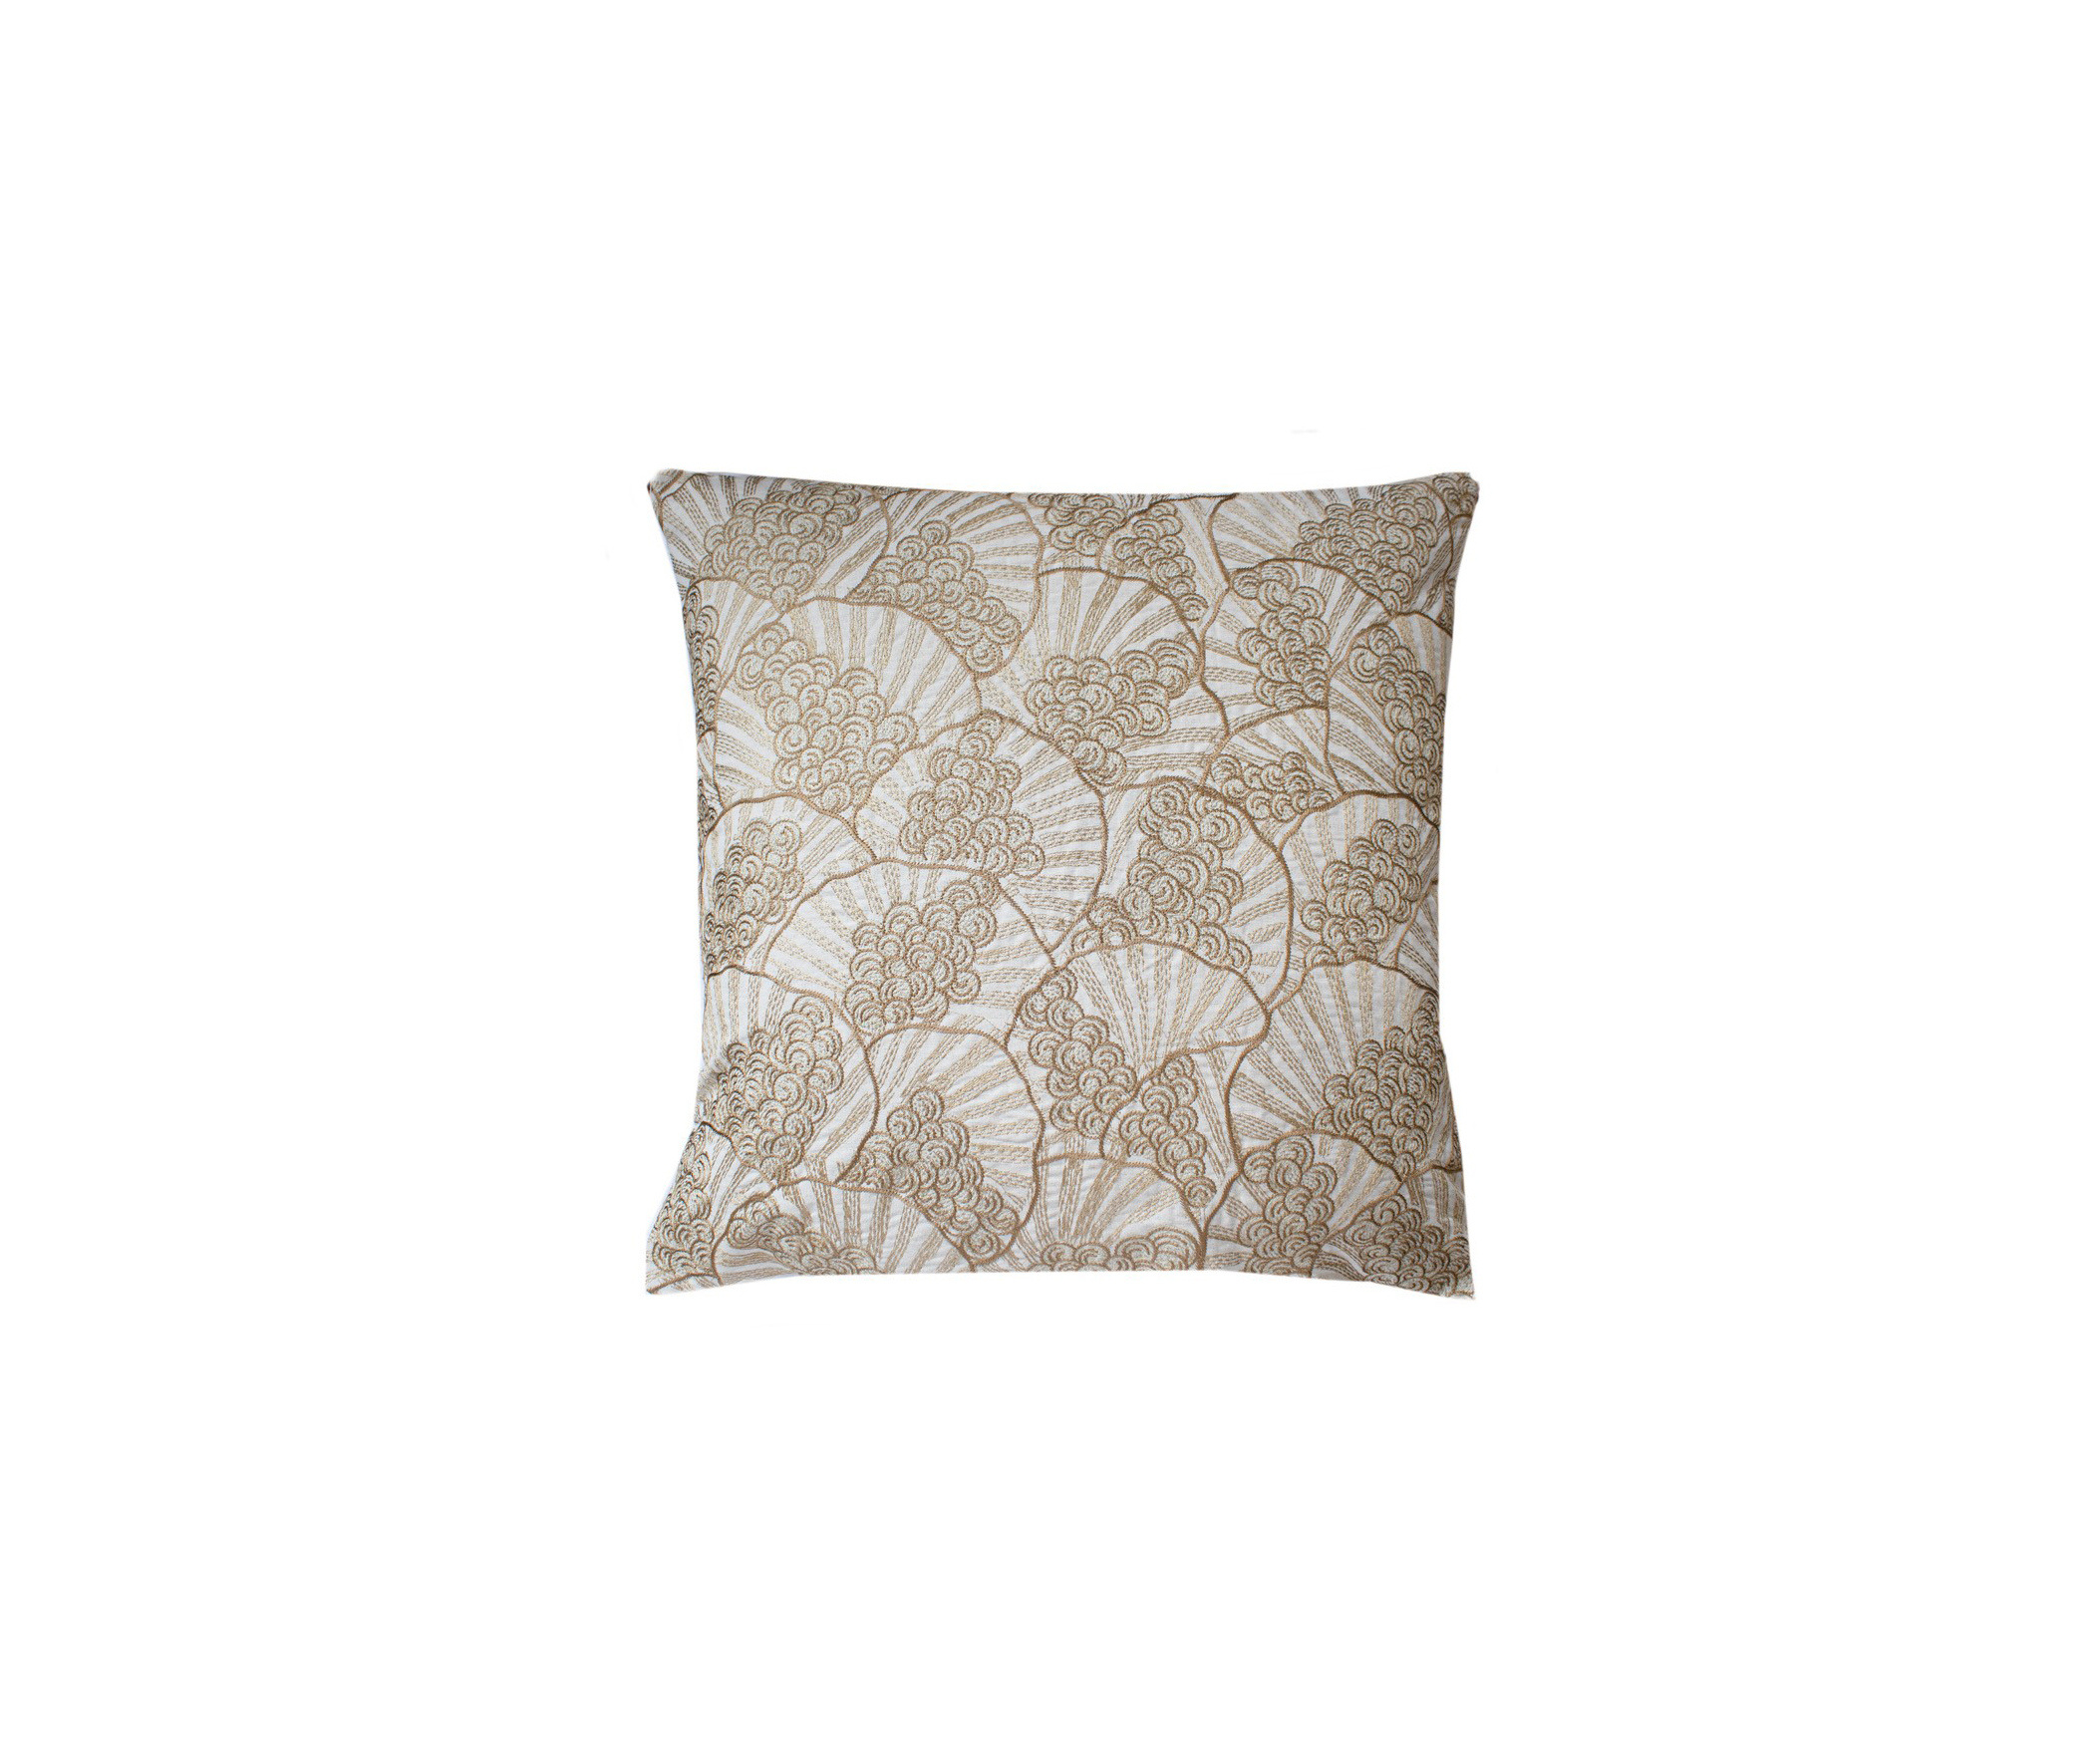 Ann-Gish_Second-Empore-Pillow-in-Champagne_int_products